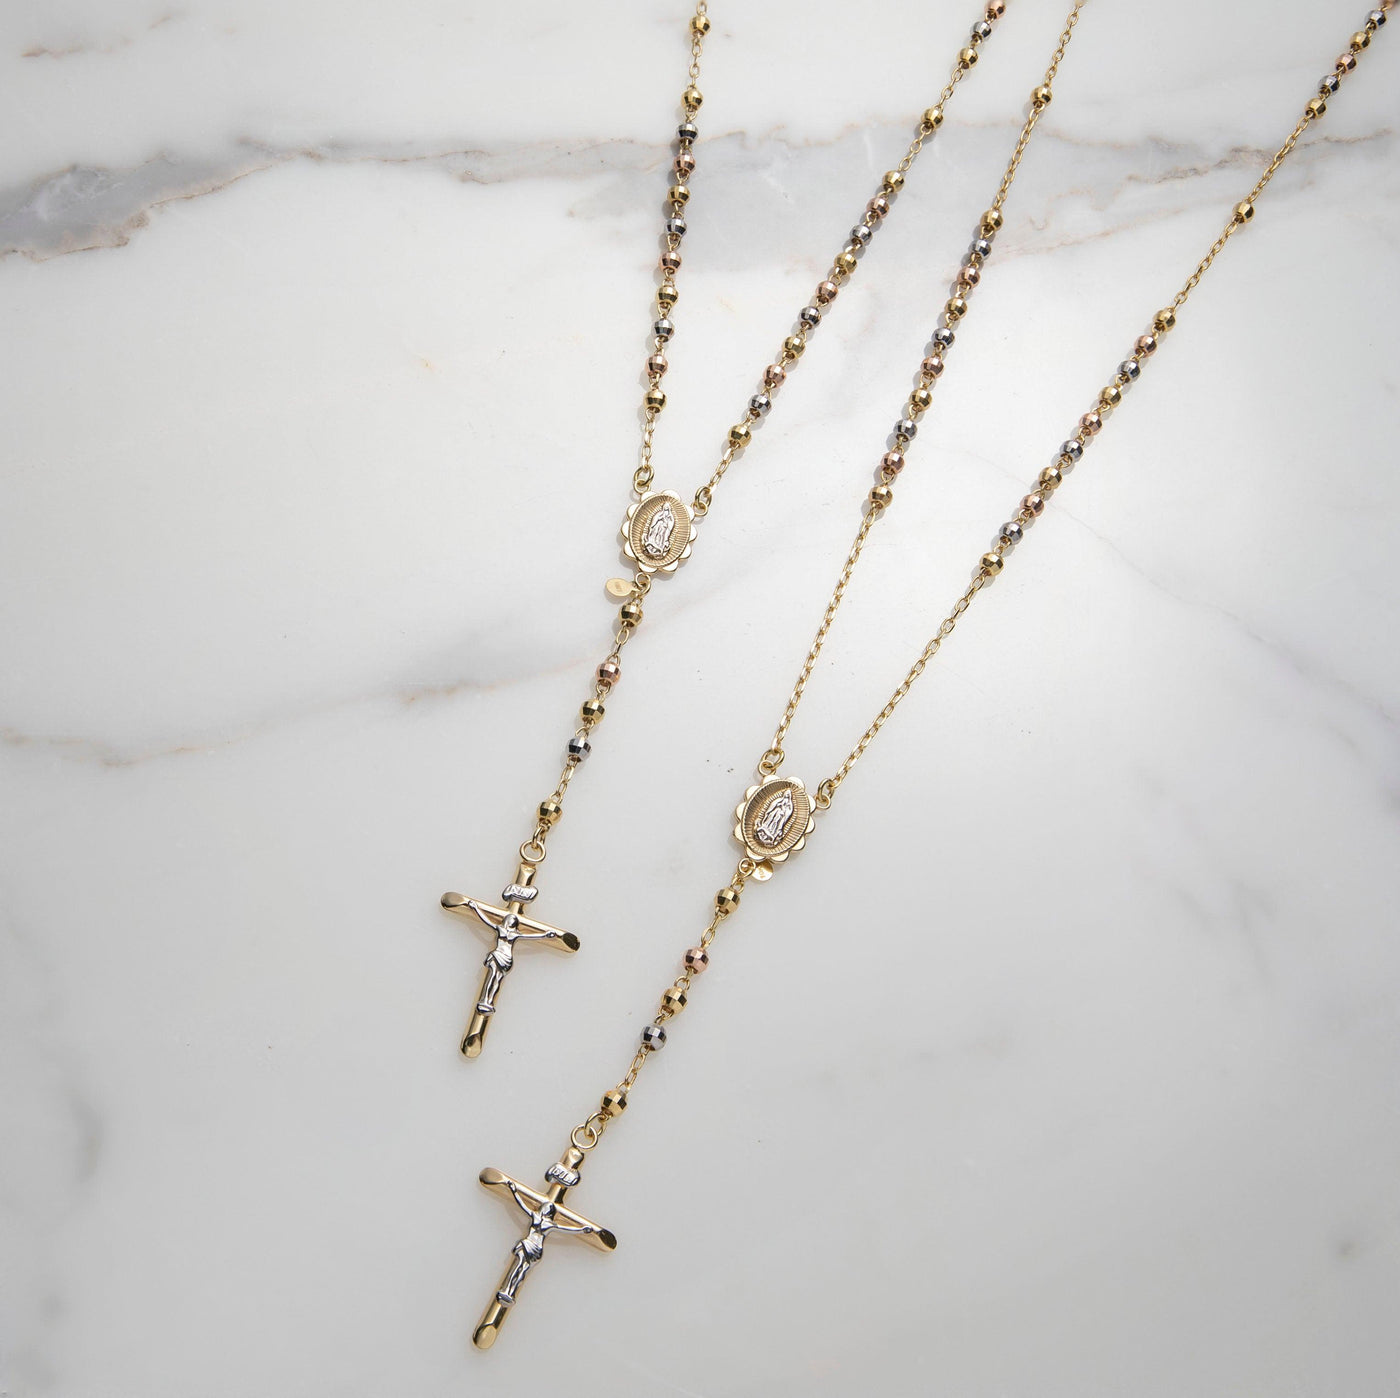 4mm Tri-Color Diamond Cut Cross Rosary Crucifix Necklace 10K Tri Color Gold - bayamjewelry